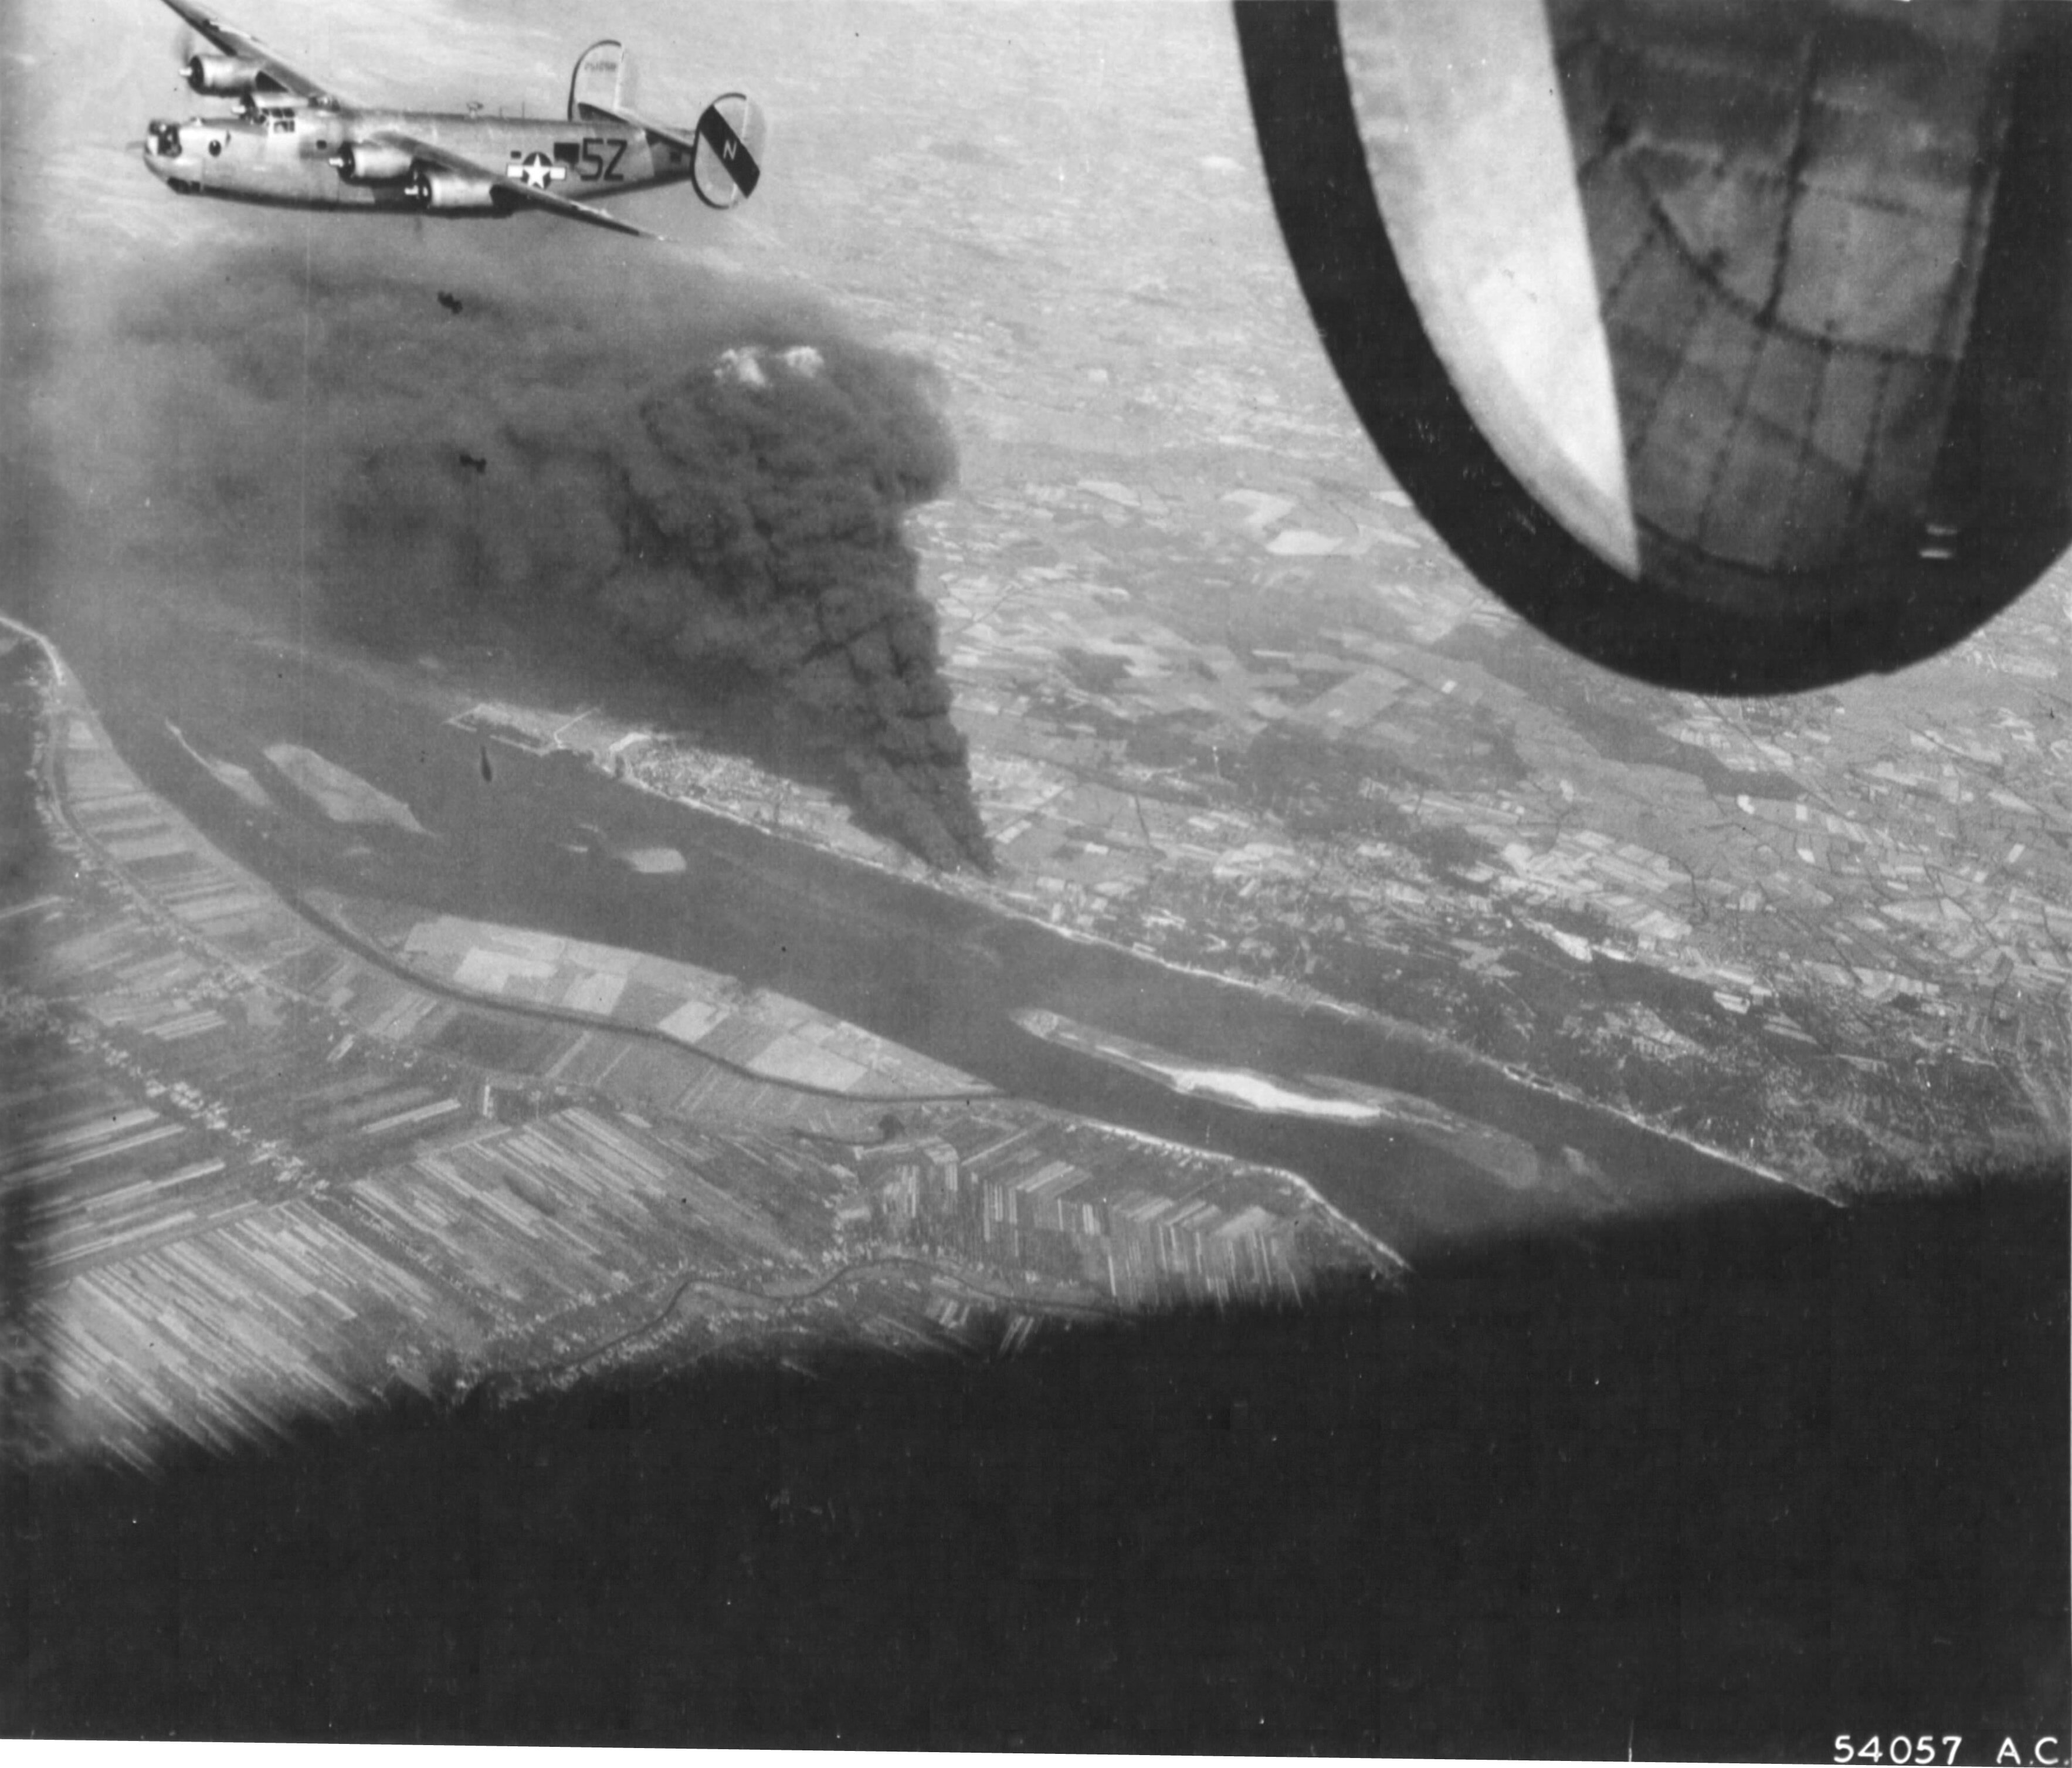 B-24J Liberator of the 856th Bomb Squadron over the target of the Rhenania-Ossag oil refinery near Hamburg, Germany, Aug 6 1944.